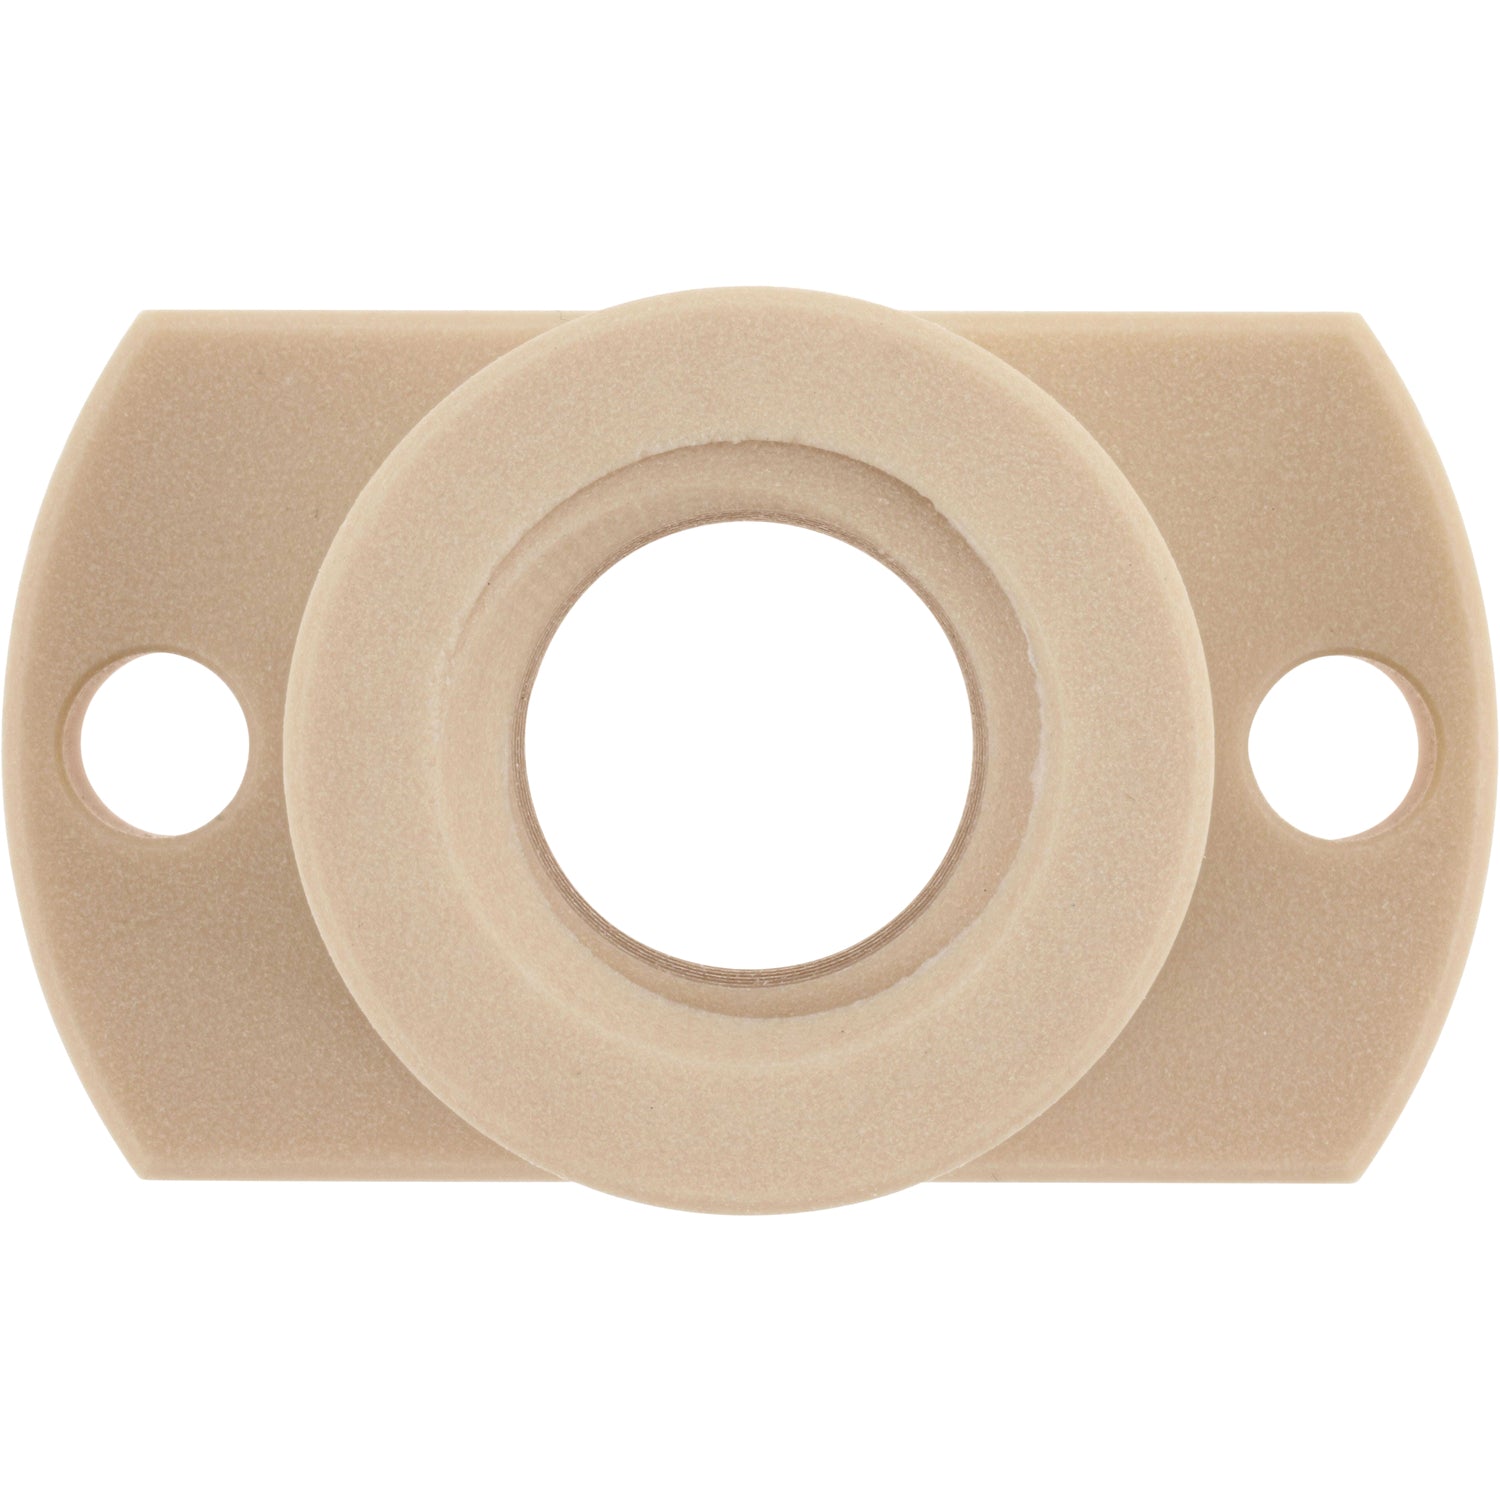 Off white DryLin® flange lead screw nut with flat, trapezoidal thread on white background. 